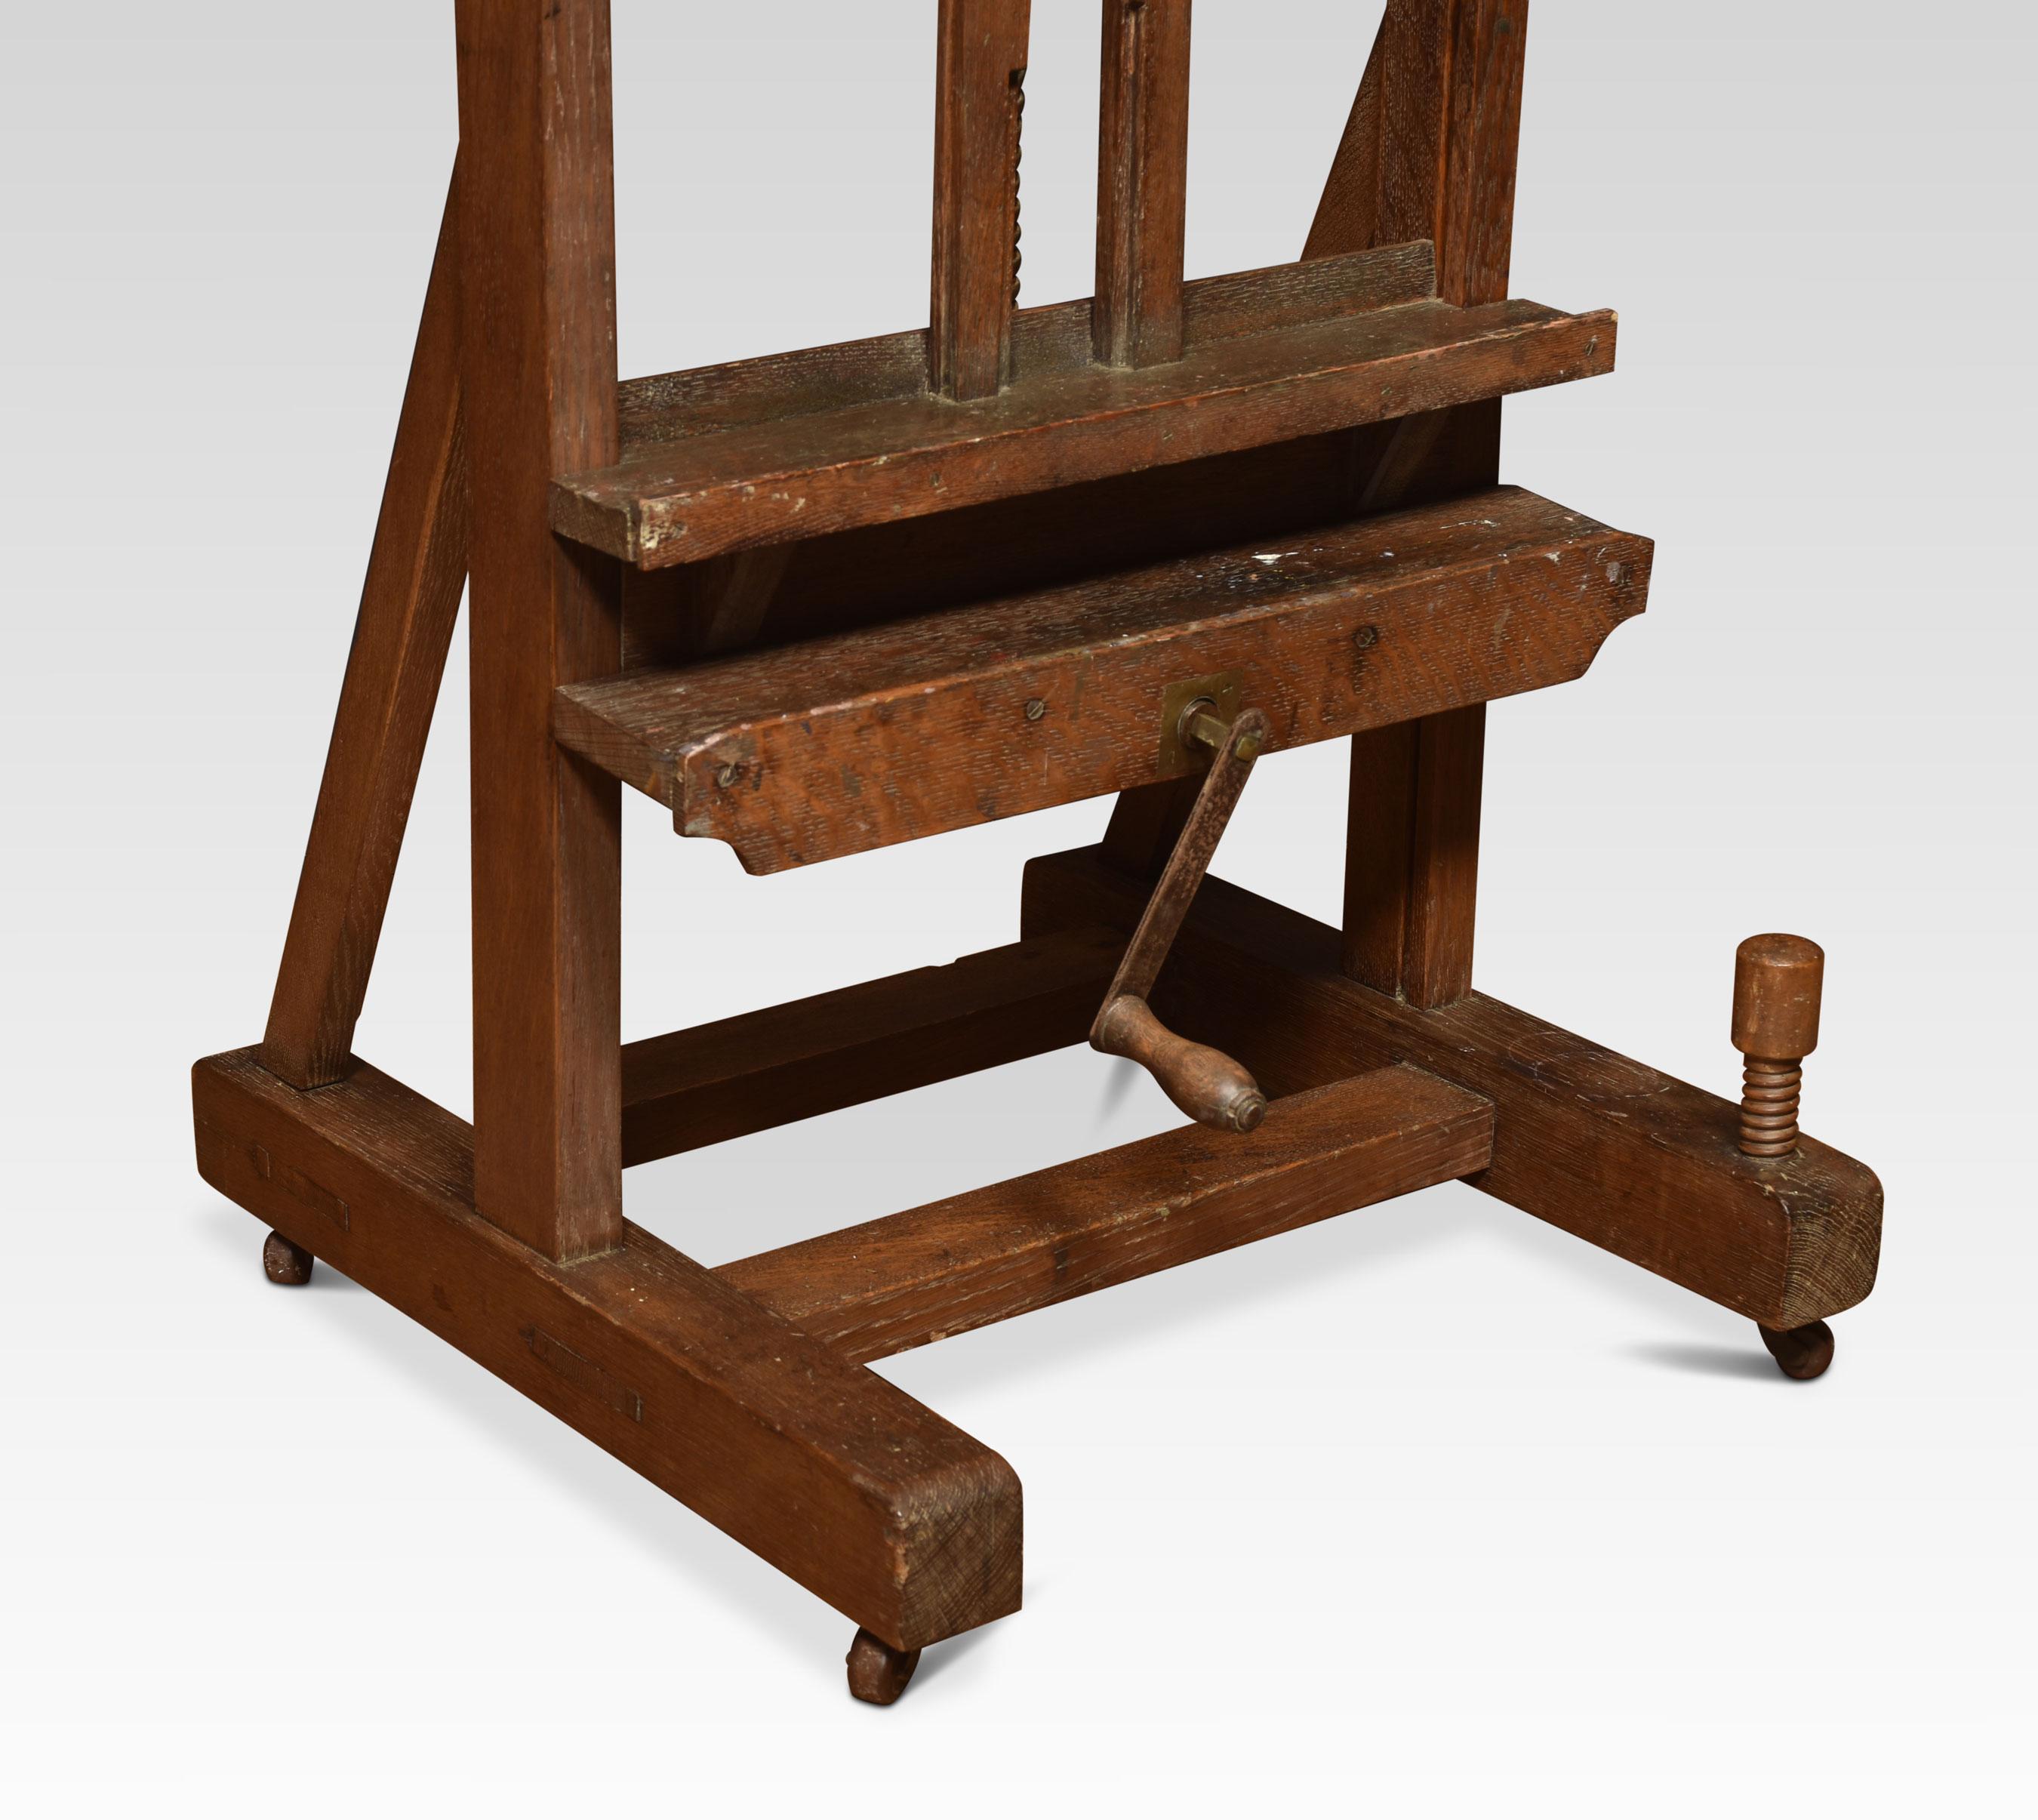 Oak artist’s adjustable studio easel raised up on trestle base terminating in casters.
Dimensions
Height 66 Inches adjustable to 99.5 Inches
Width 24.5 Inches
Depth 25 Inches.